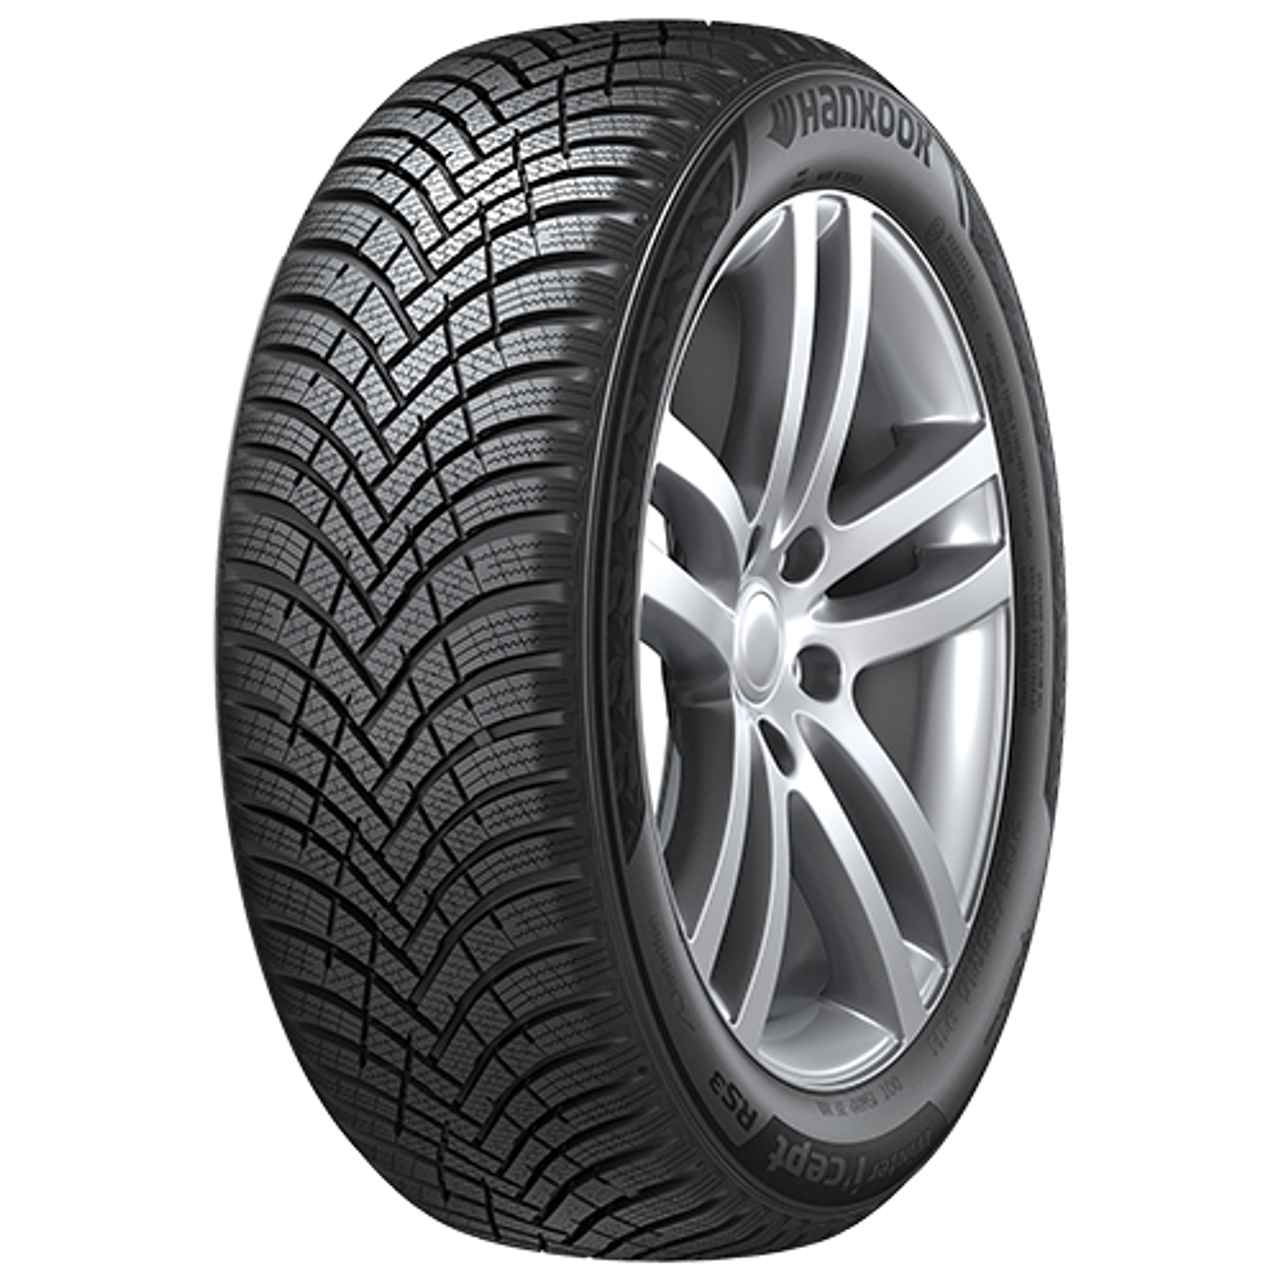 HANKOOK WINTER I*CEPT RS3 175/70R14 88T BSW